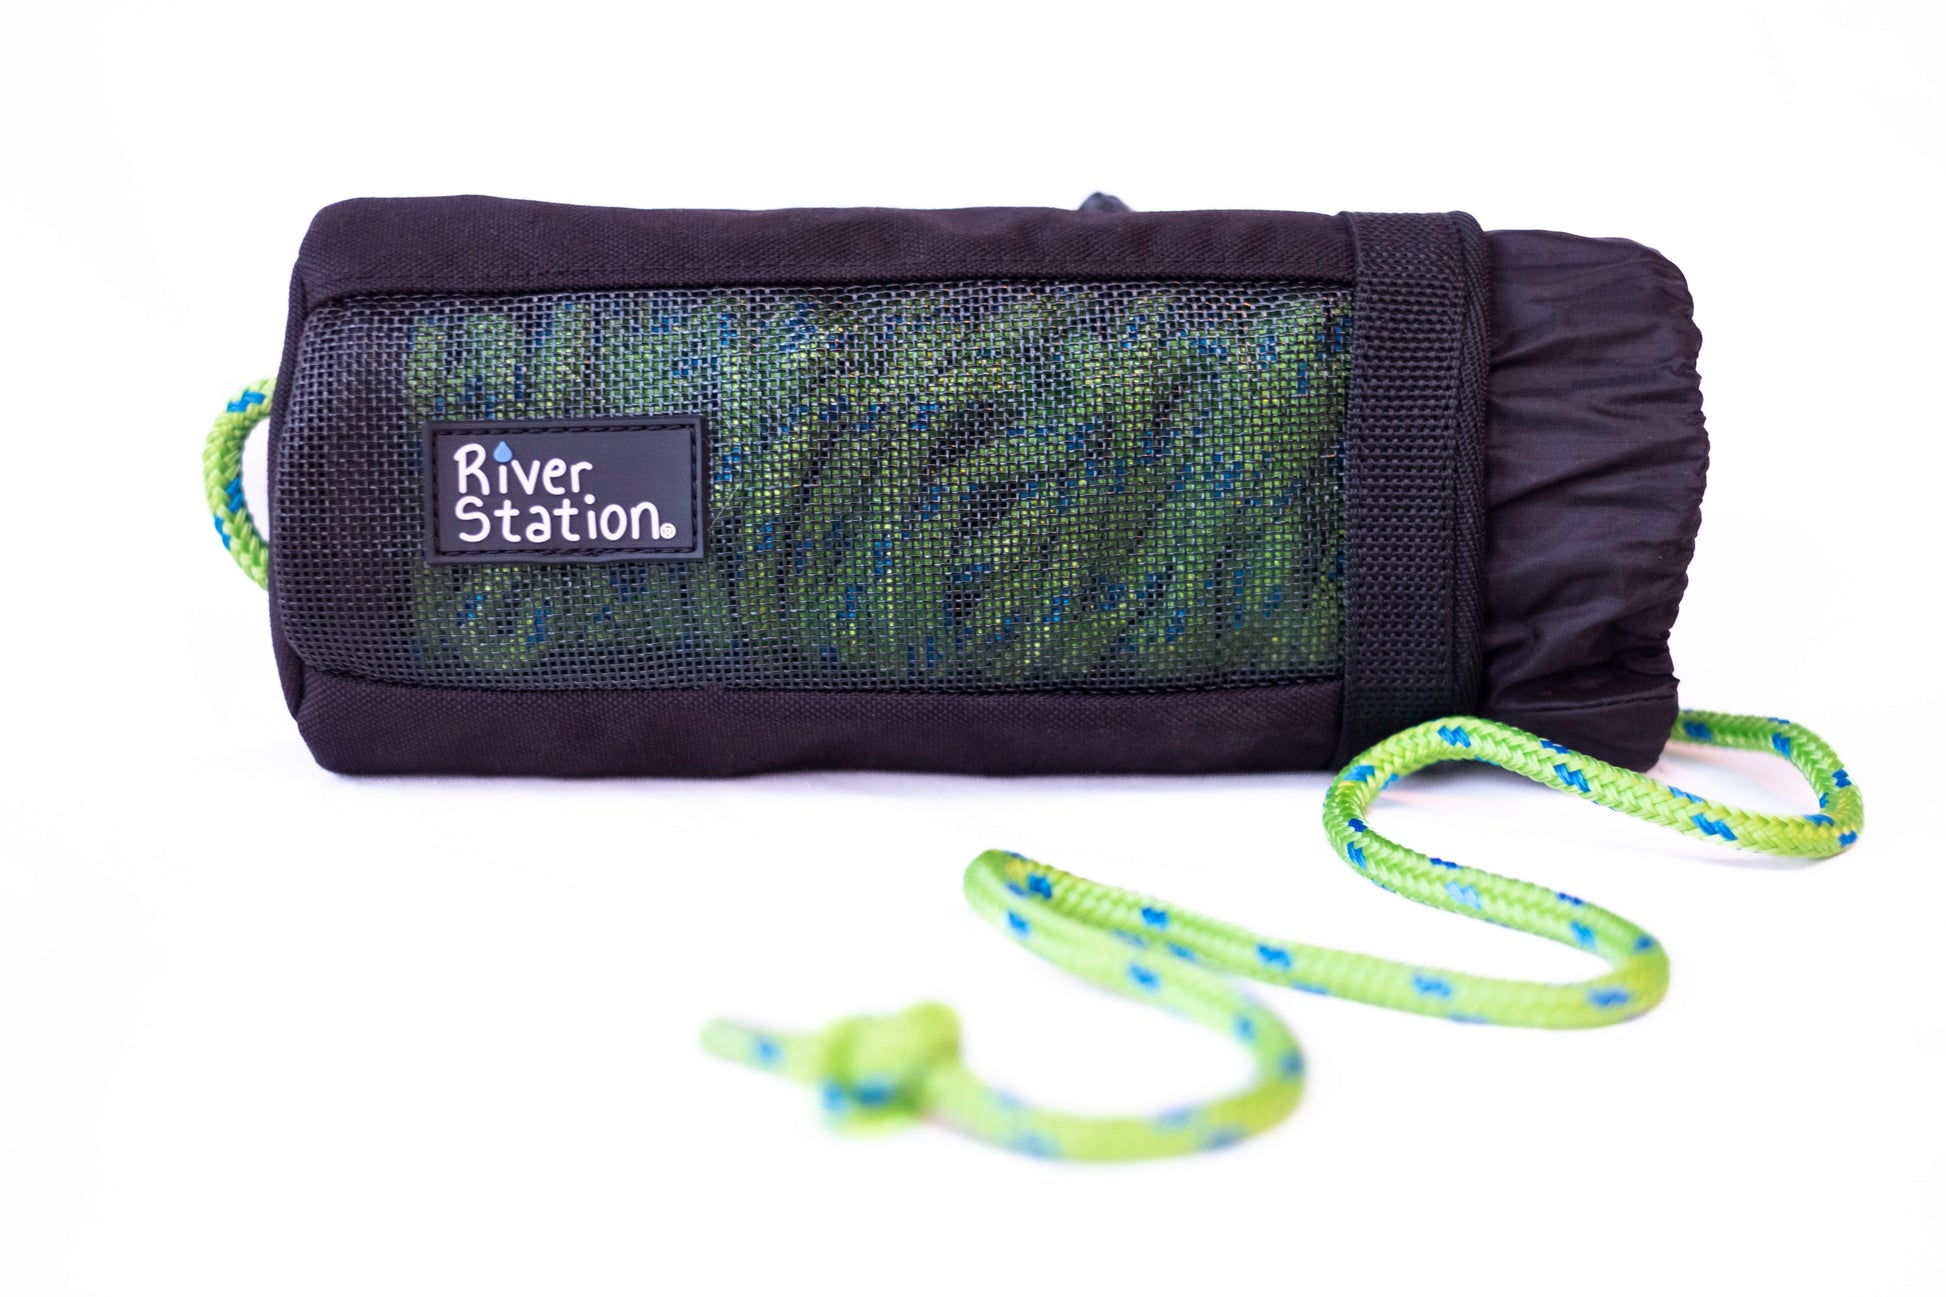 Lime green rope throw bag for whitewater rafting